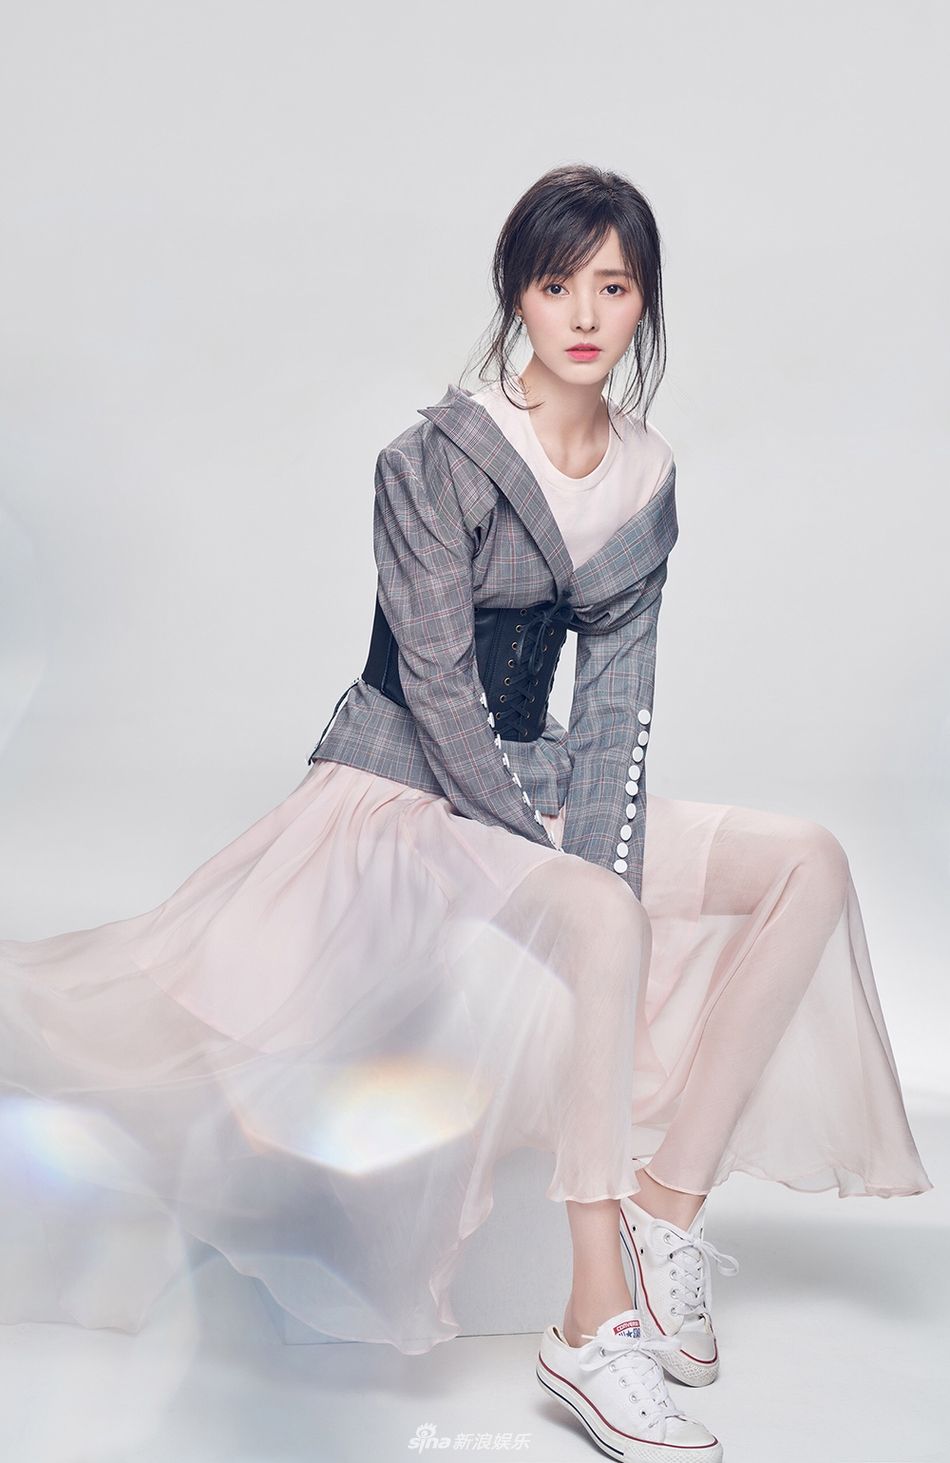 Xiaomeng Cheng Sexy and Hottest Photos , Latest Pics